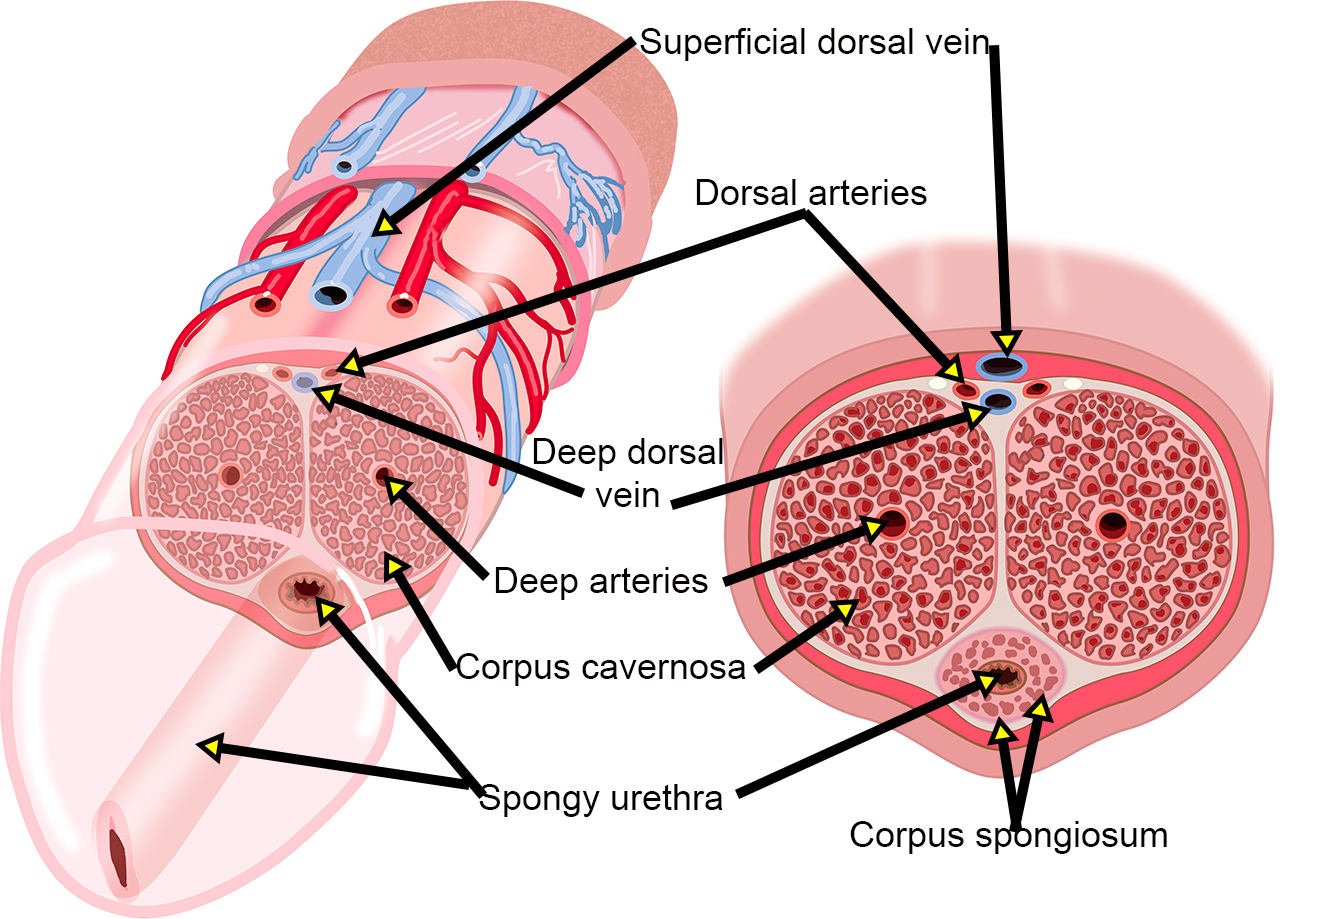 Drawings of a  cross-sections view of the penis in flaccid (soft) showing vasculature 